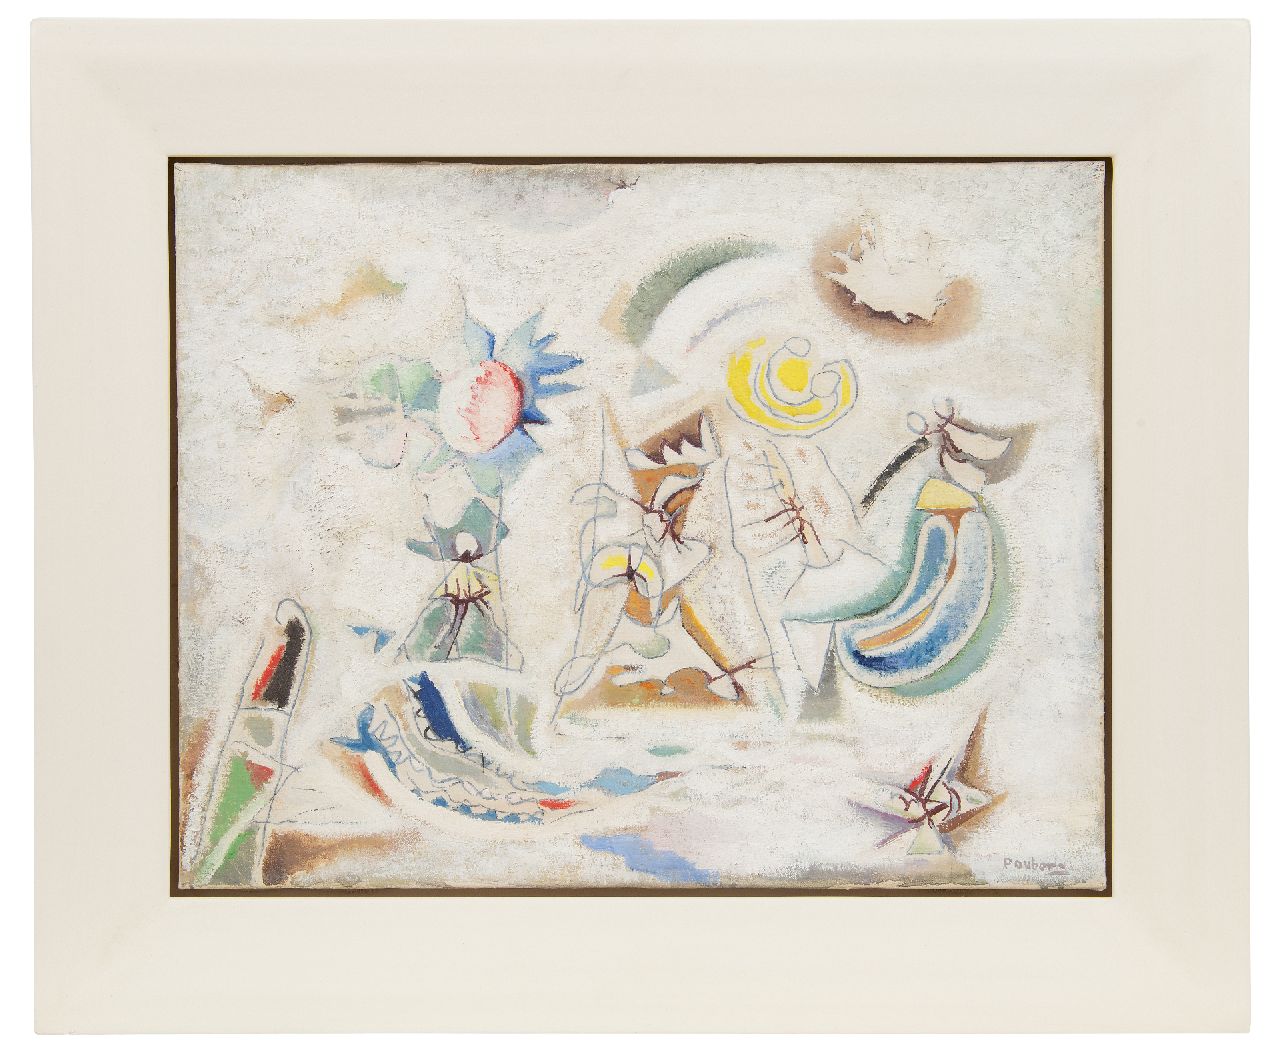 Ouborg P.  | Pieter 'Piet' Ouborg | Paintings offered for sale | Dynamic lightness, oil on canvas 50.2 x 64.5 cm, signed l.r. and painted circa 1949